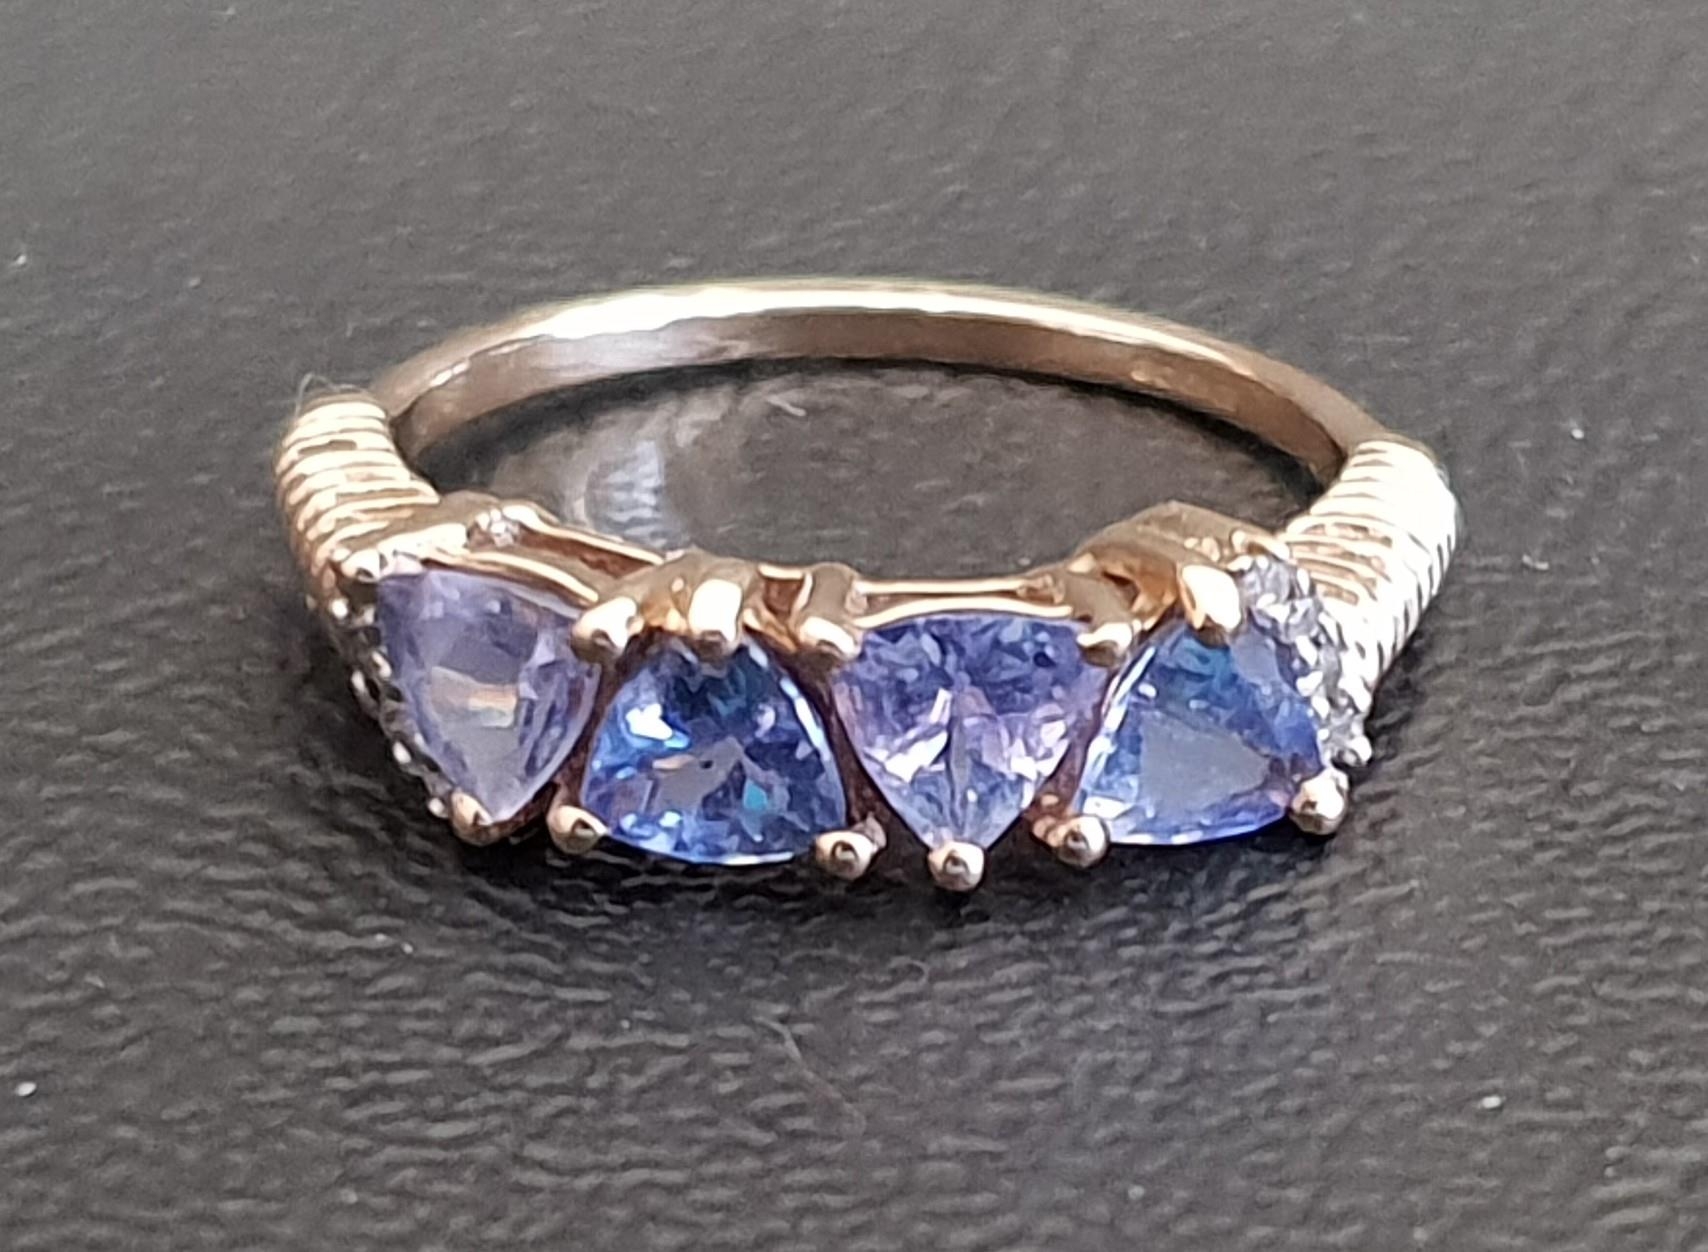 TANZANITE FOUR STONE RING the four trillion cut tanzanites on nine carat gold shank with ribbed